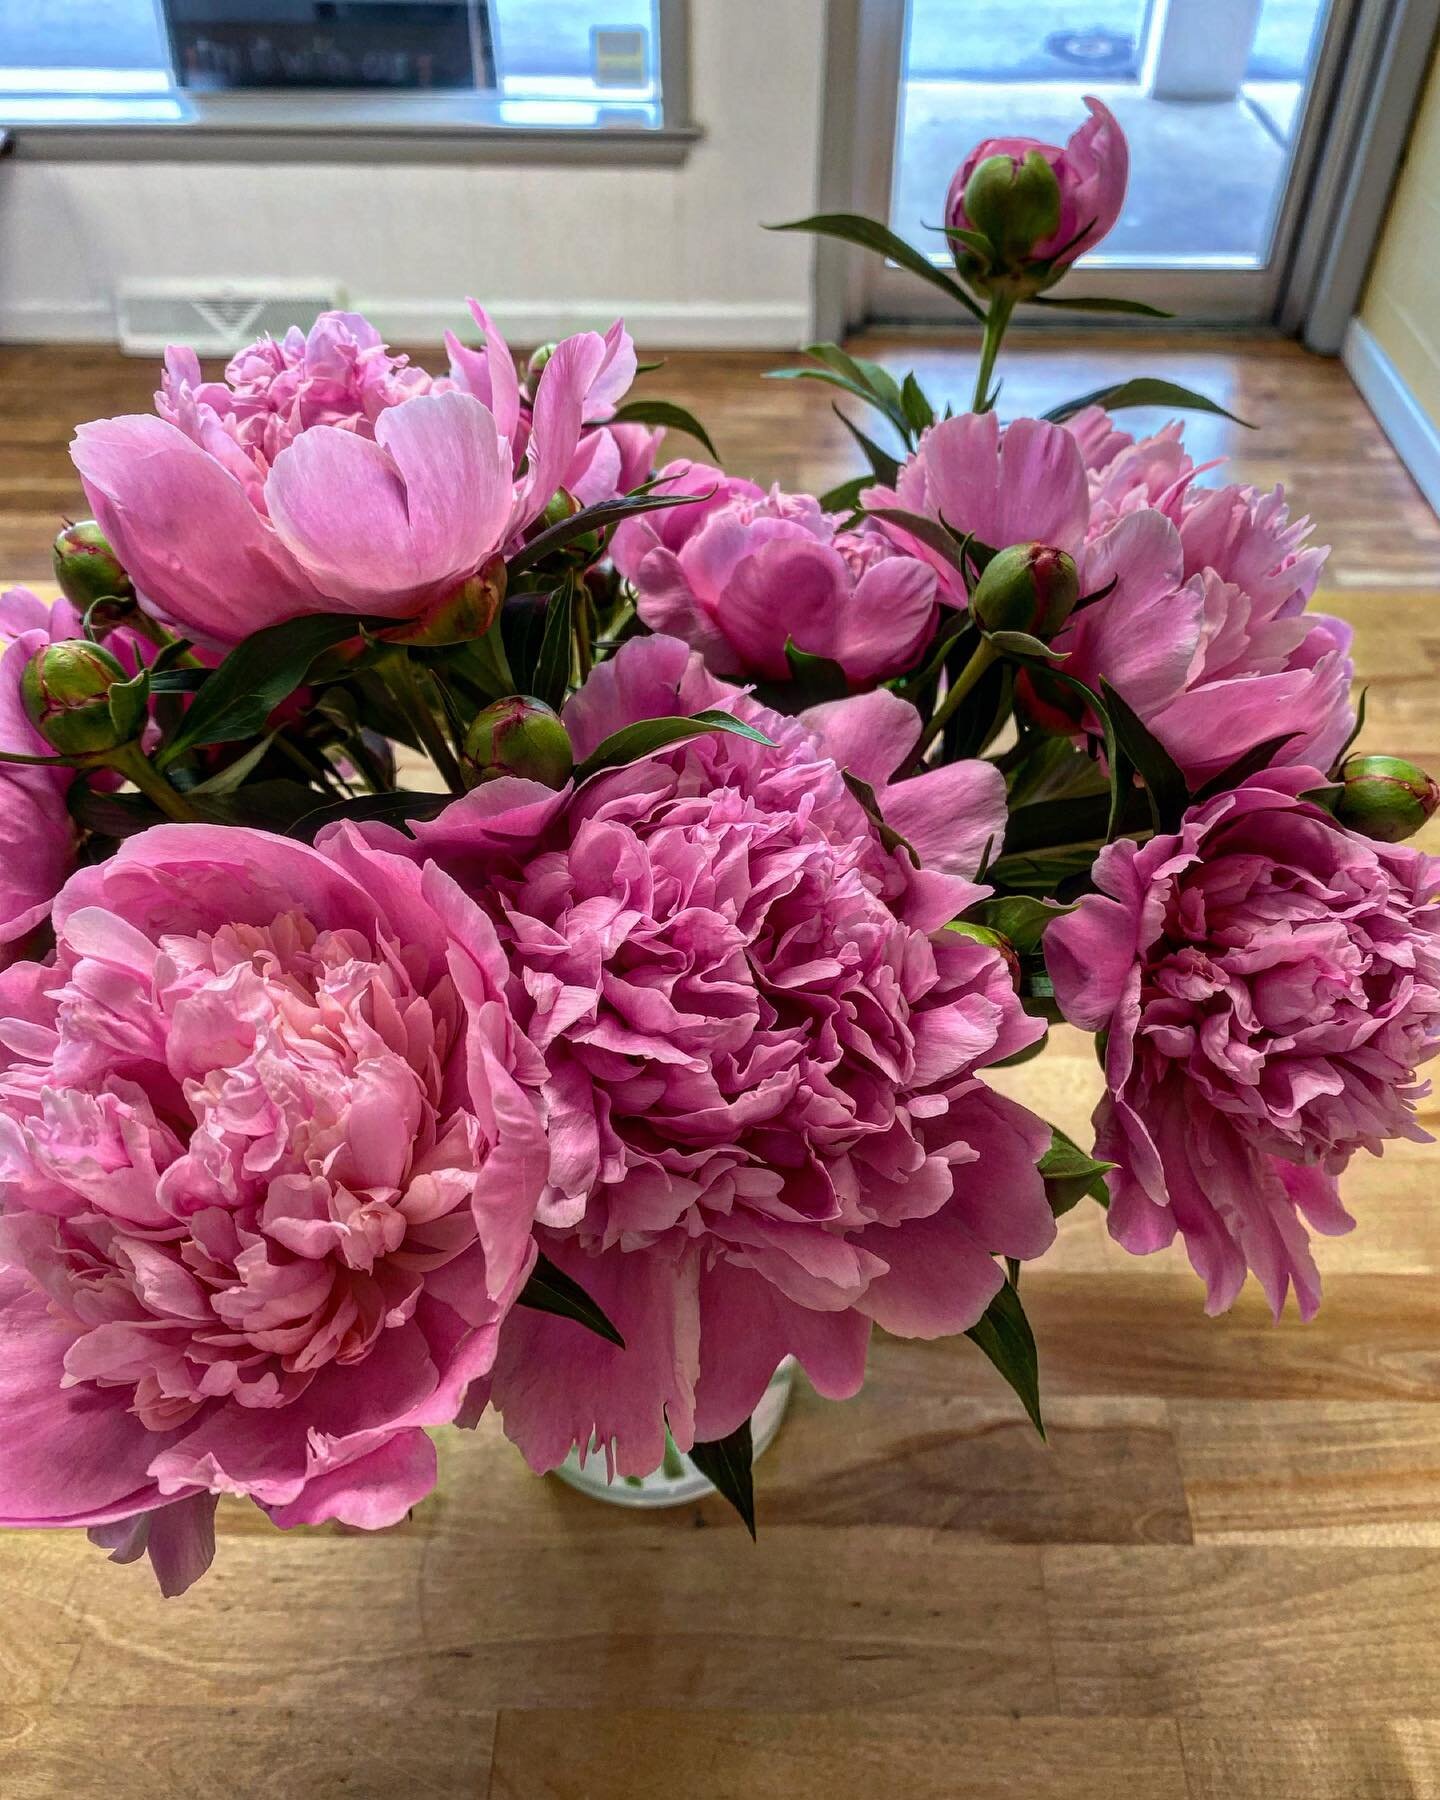 we were gifted these beautiful peonies today! one of my favorite flowers! 🌸
it&rsquo;s been quite the week of being busy at the shop, adding on Lititz Farmers Market and more. Just want to say how thankful we are to see you all each week and meet ne